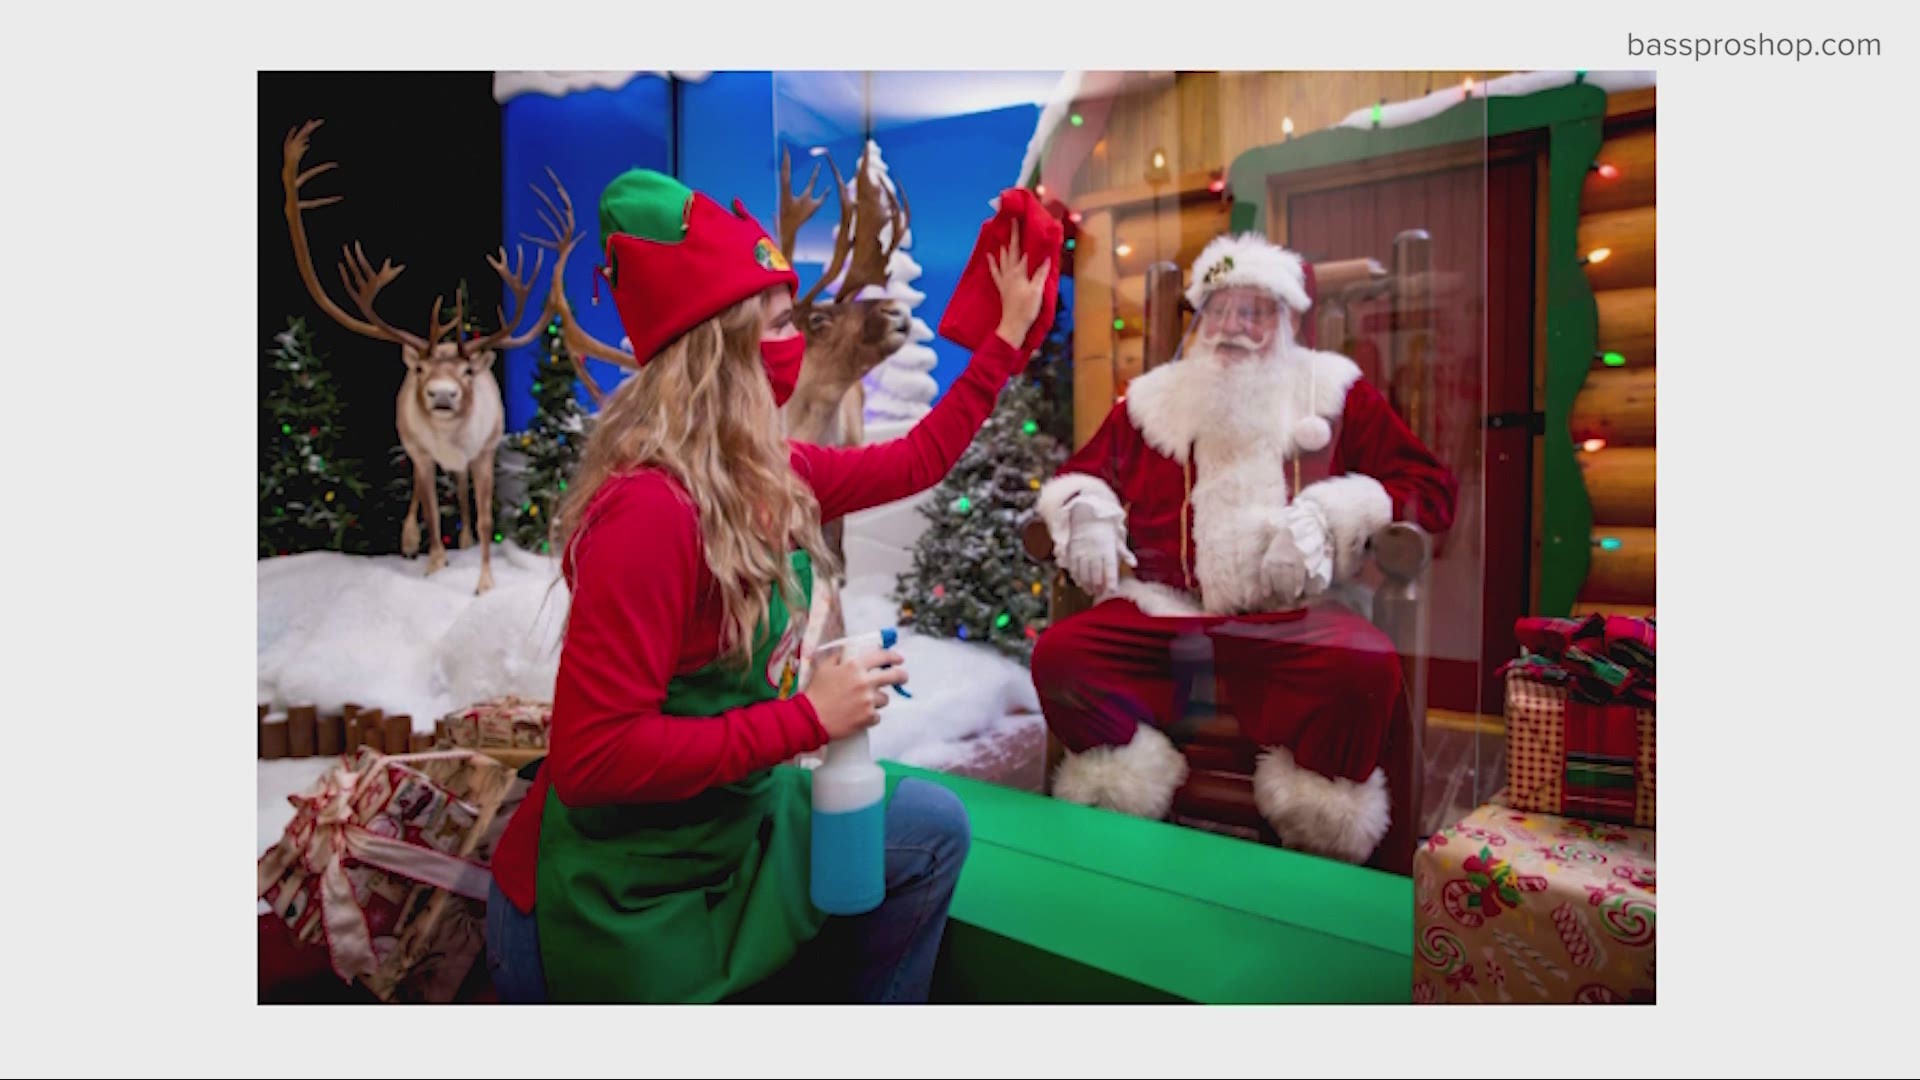 Sacramento's Arden Fair Mall is taking precautions for visiting Santa during the pandemic, trying to keep everyone safe and healthy so Santa can still deliver gifts.